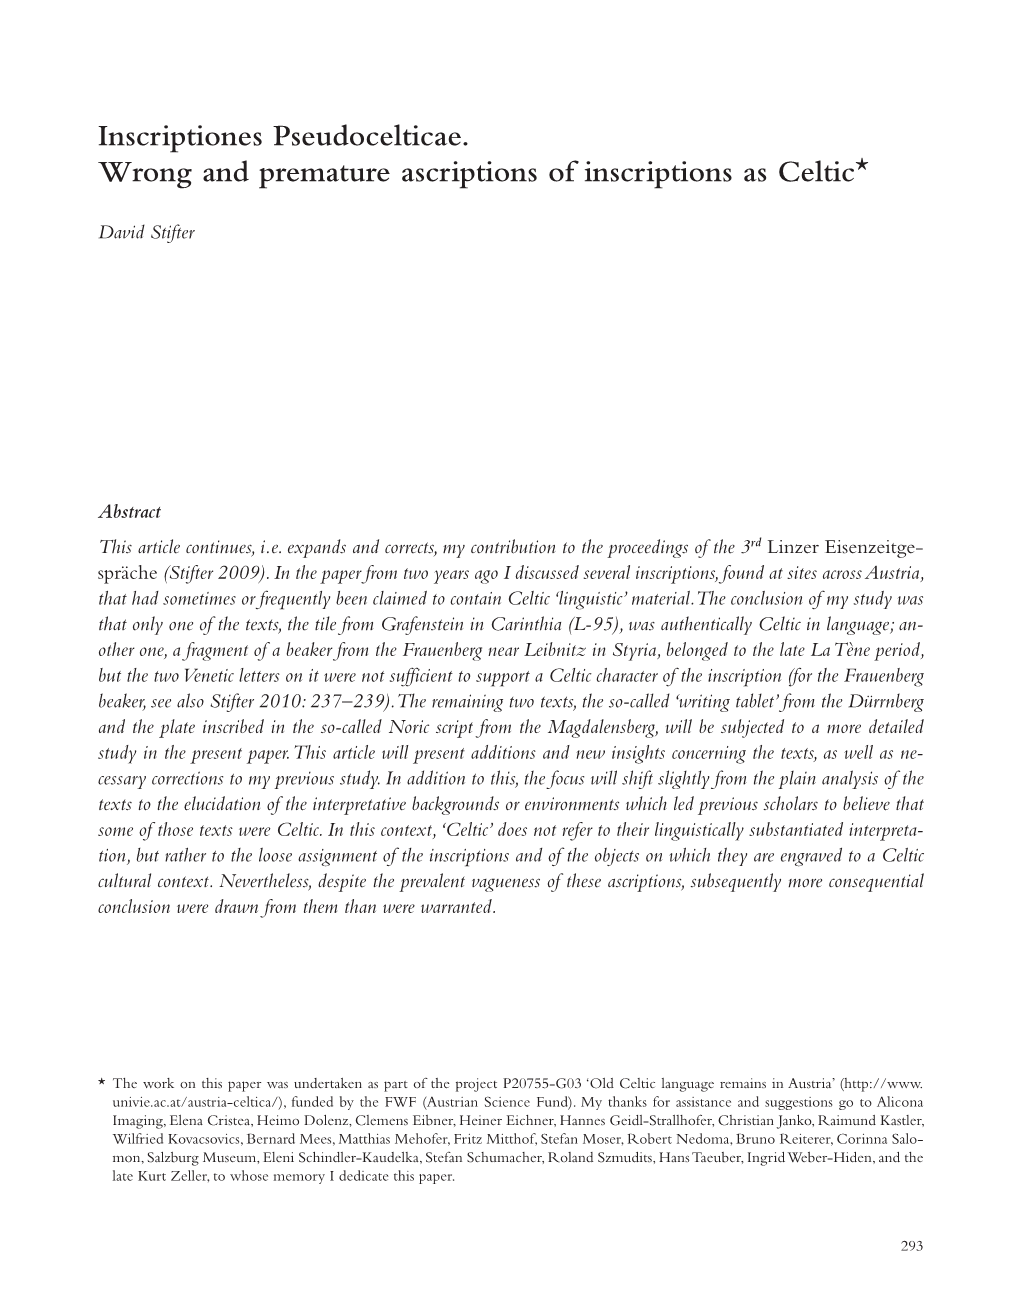 Inscriptiones Pseudocelticae. Wrong and Premature Ascriptions of Inscriptions As Celtic*